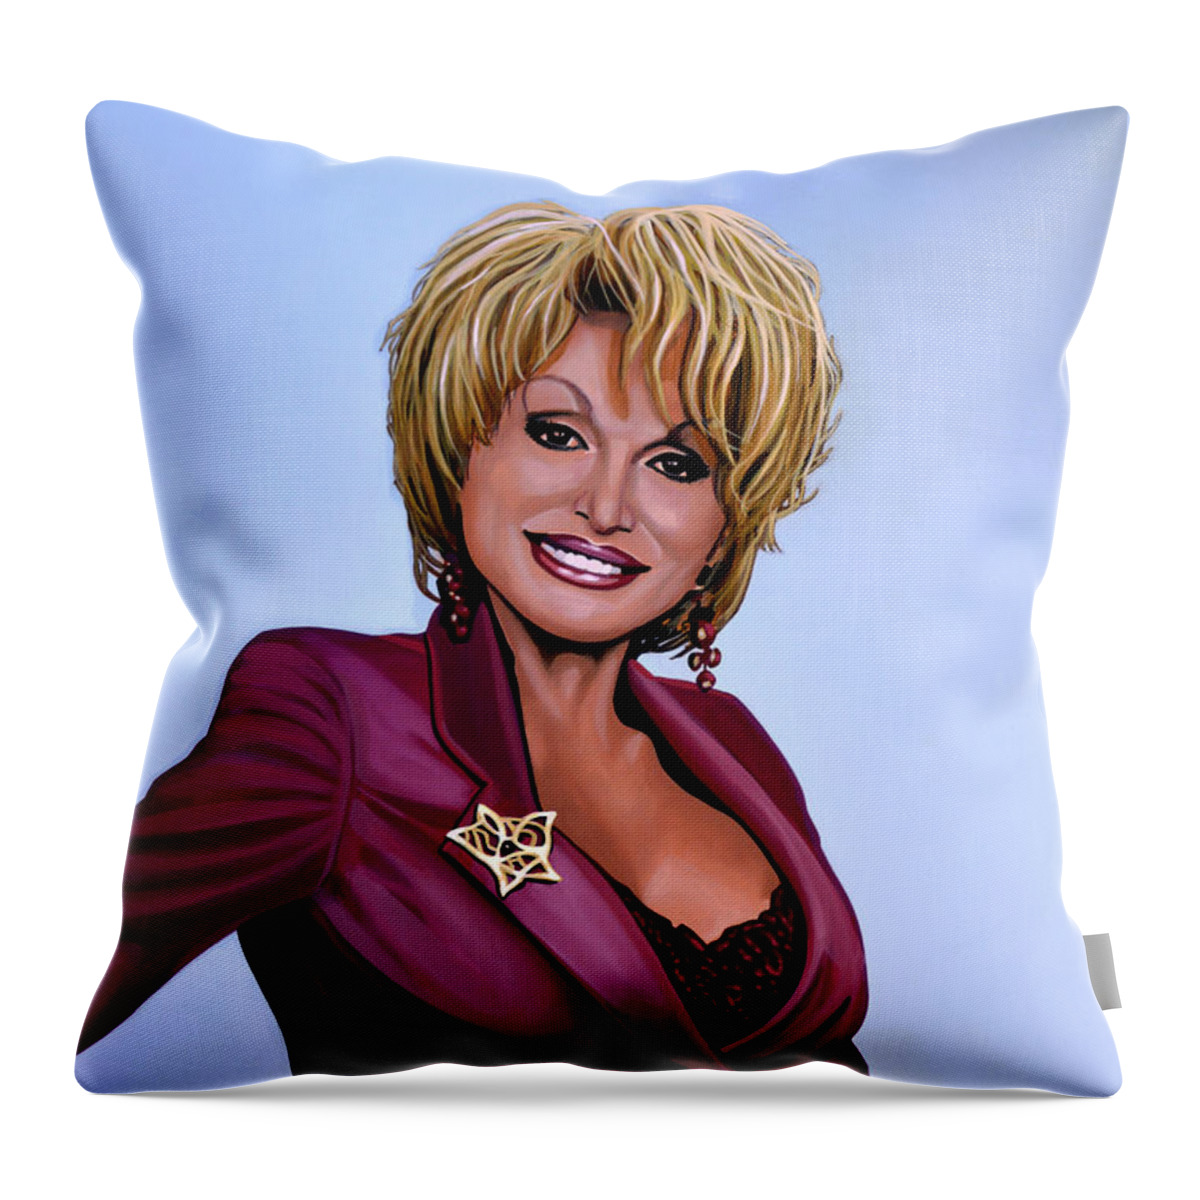 Dolly Parton Throw Pillow featuring the painting Dolly Parton by Paul Meijering